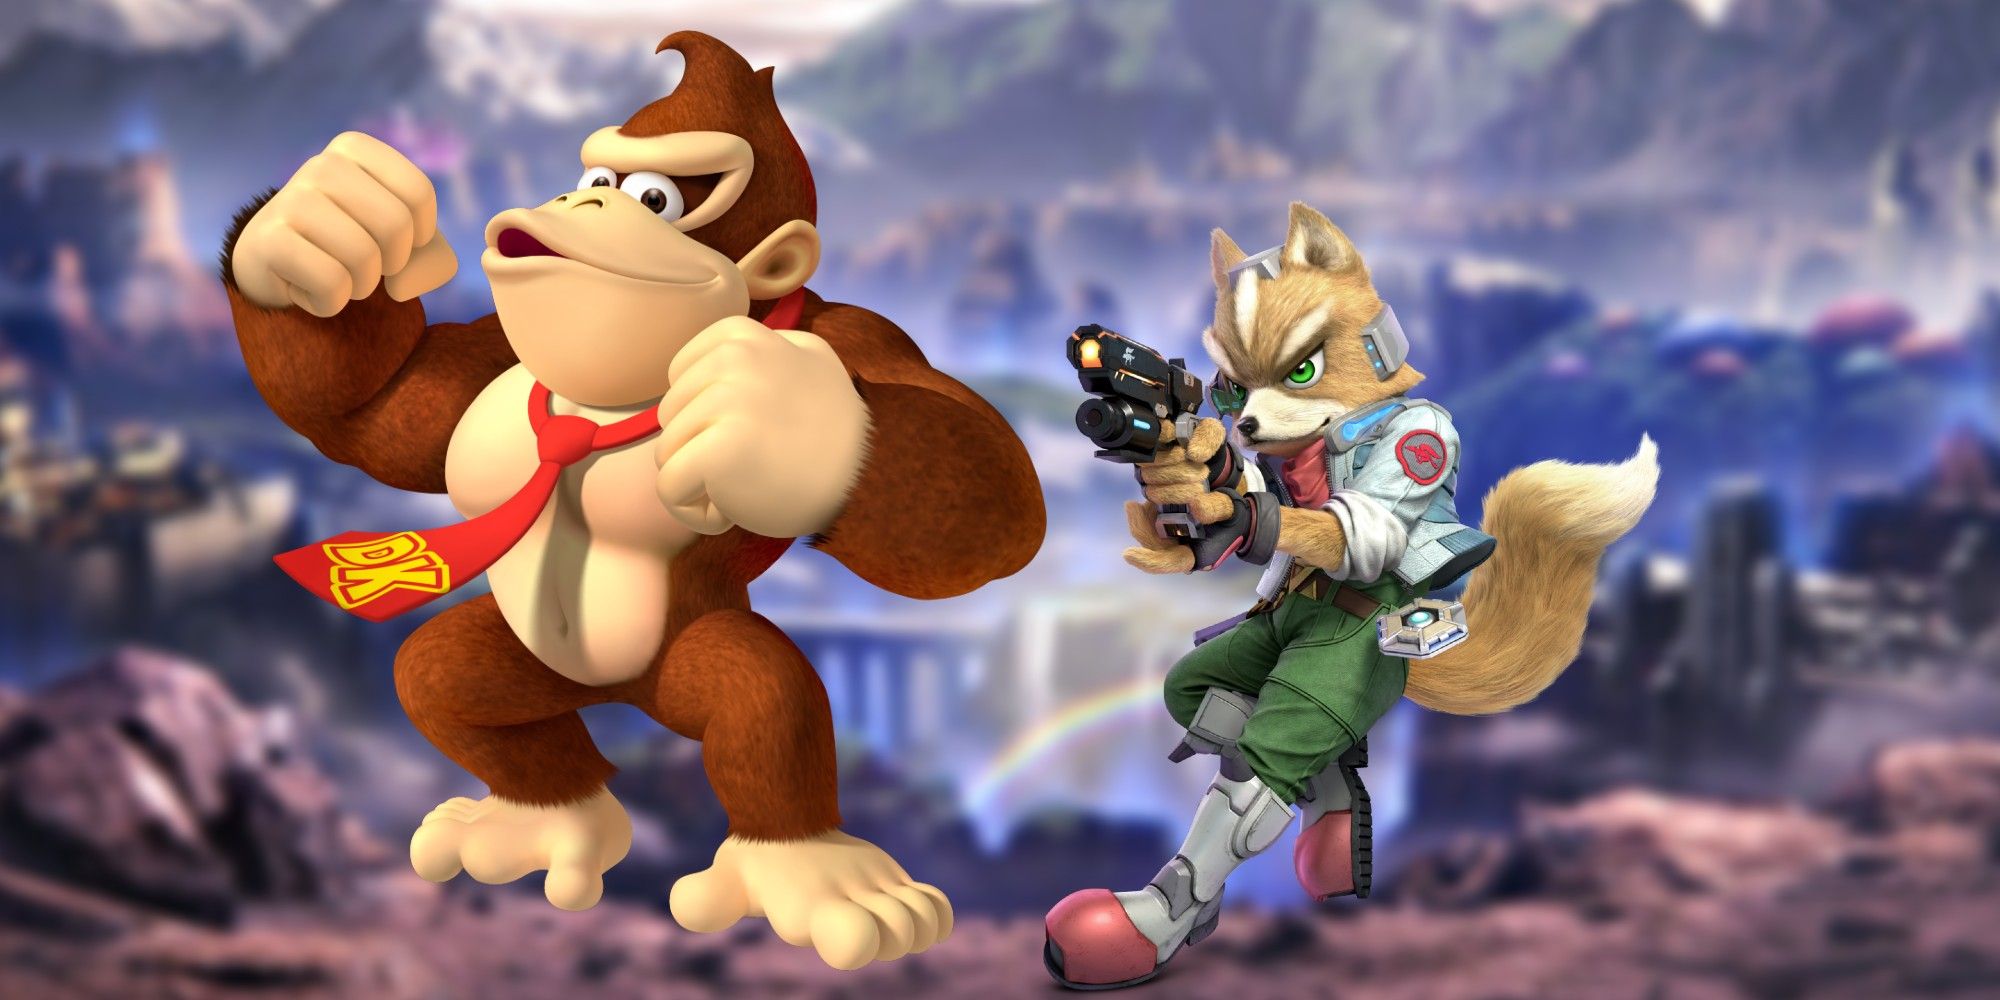 fox and donkey kong in smash bros ultimate